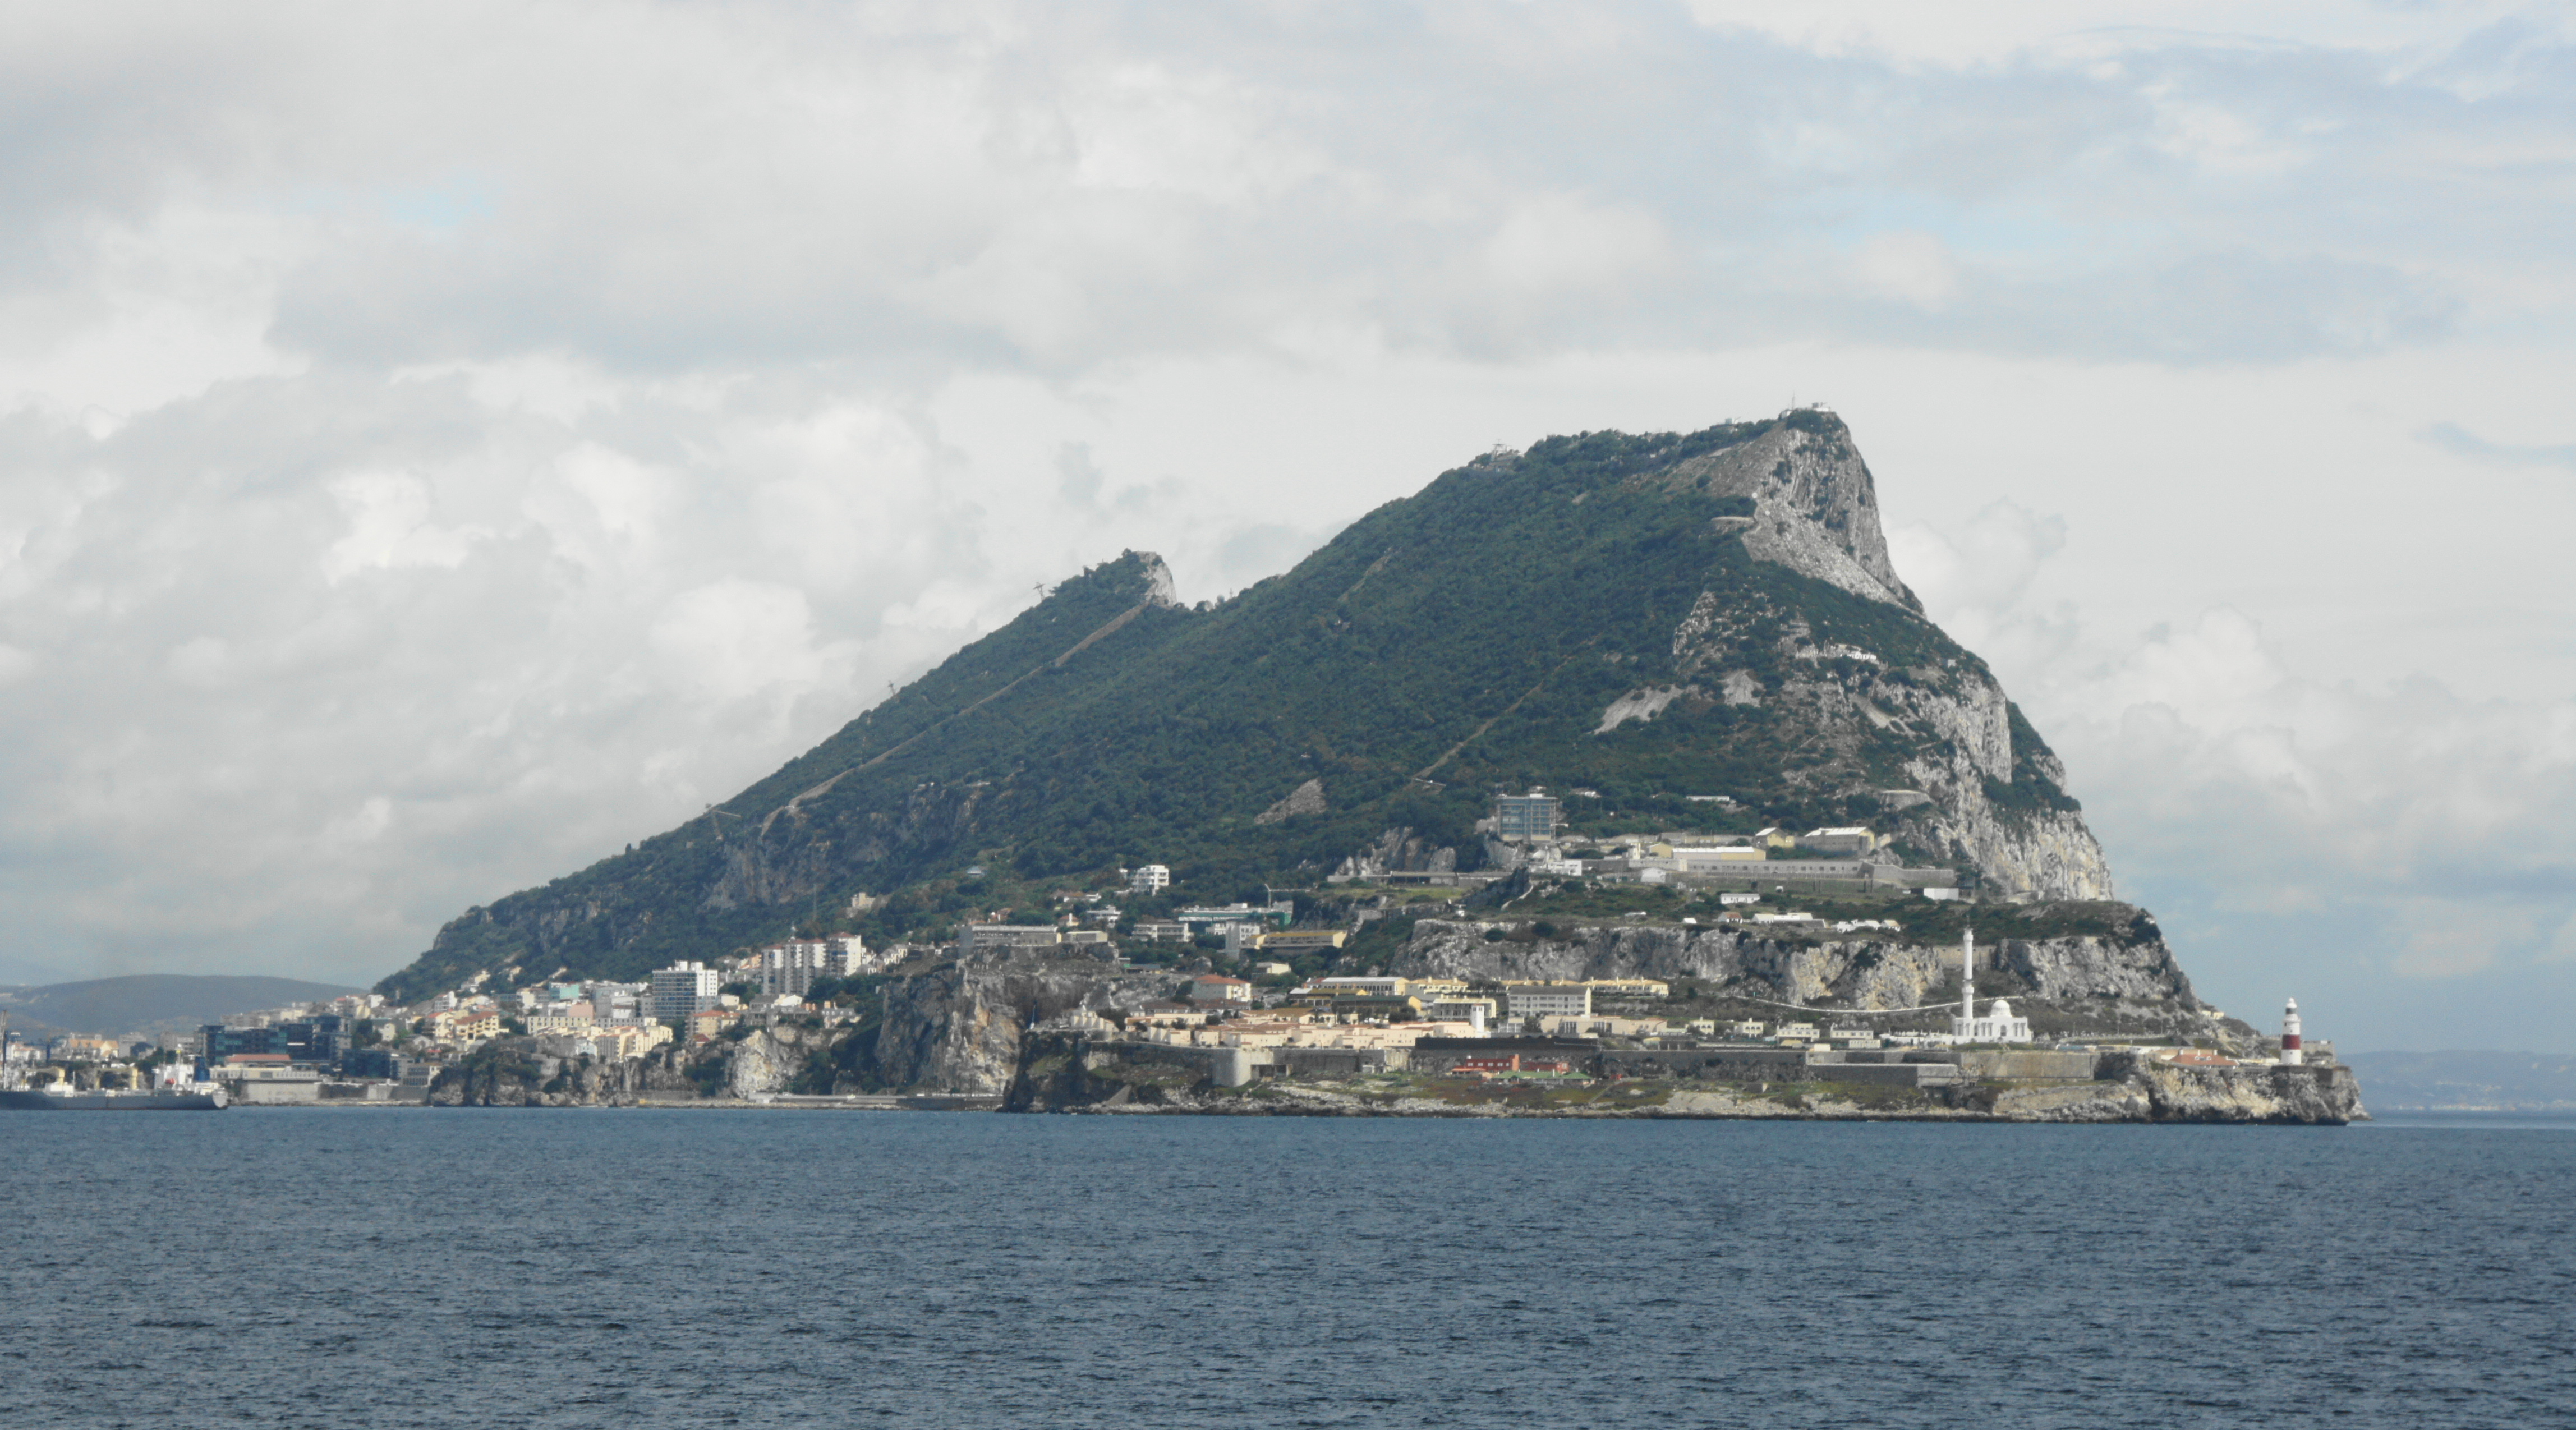 File:View of the Rock of Gibraltar from the Strait.jpg - Wikimedia Commons